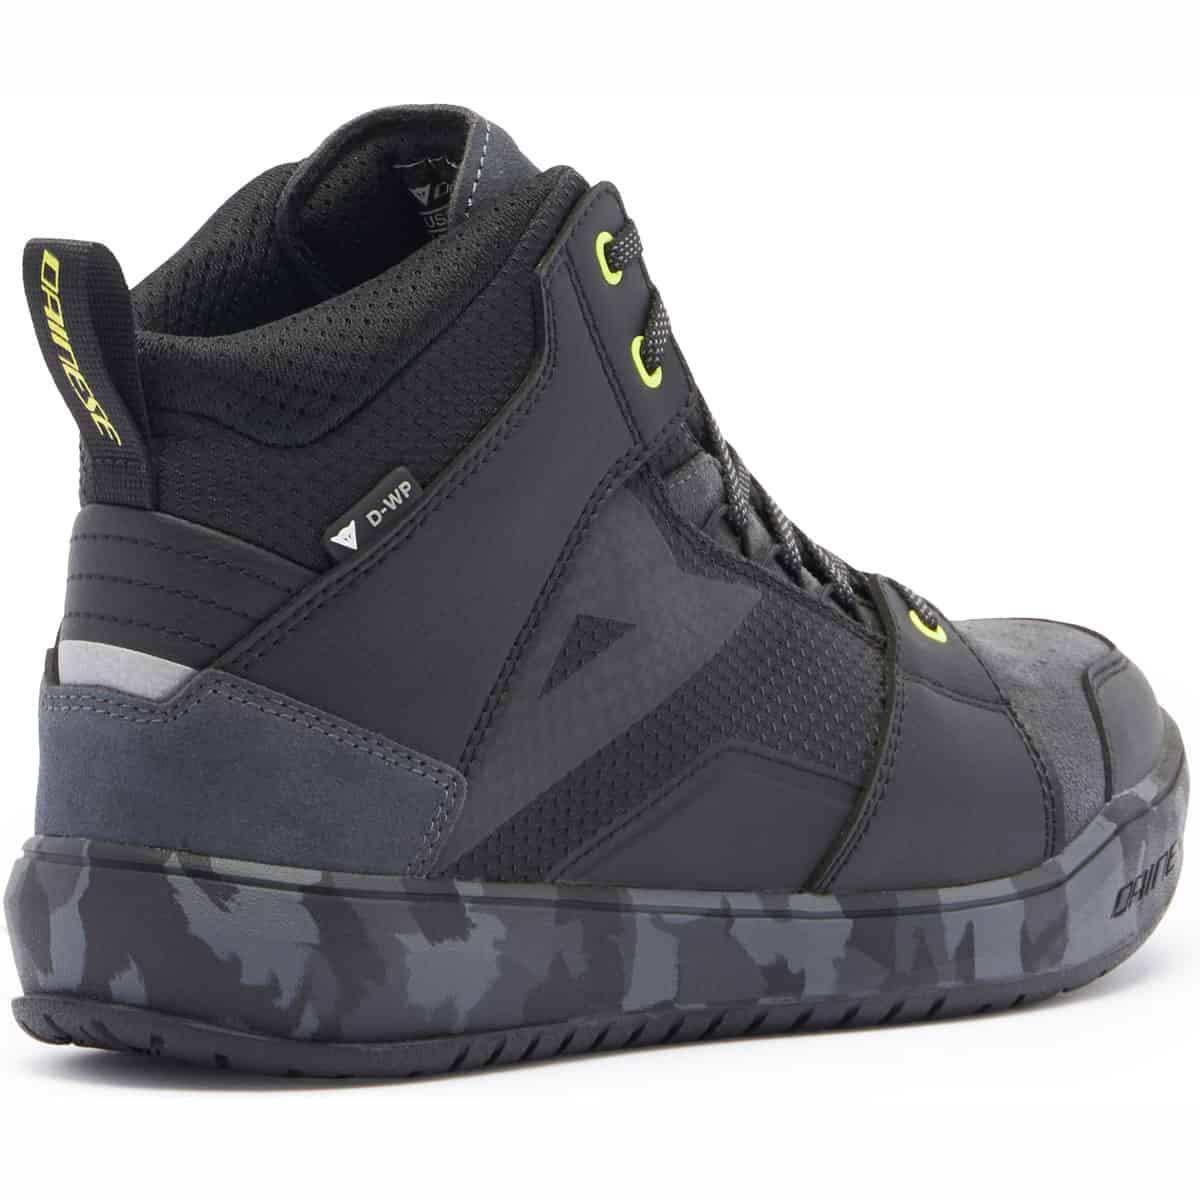 Dainese Suburb D-WP boots: Designed for waterproof comfort &amp; style both on &amp; off the bike